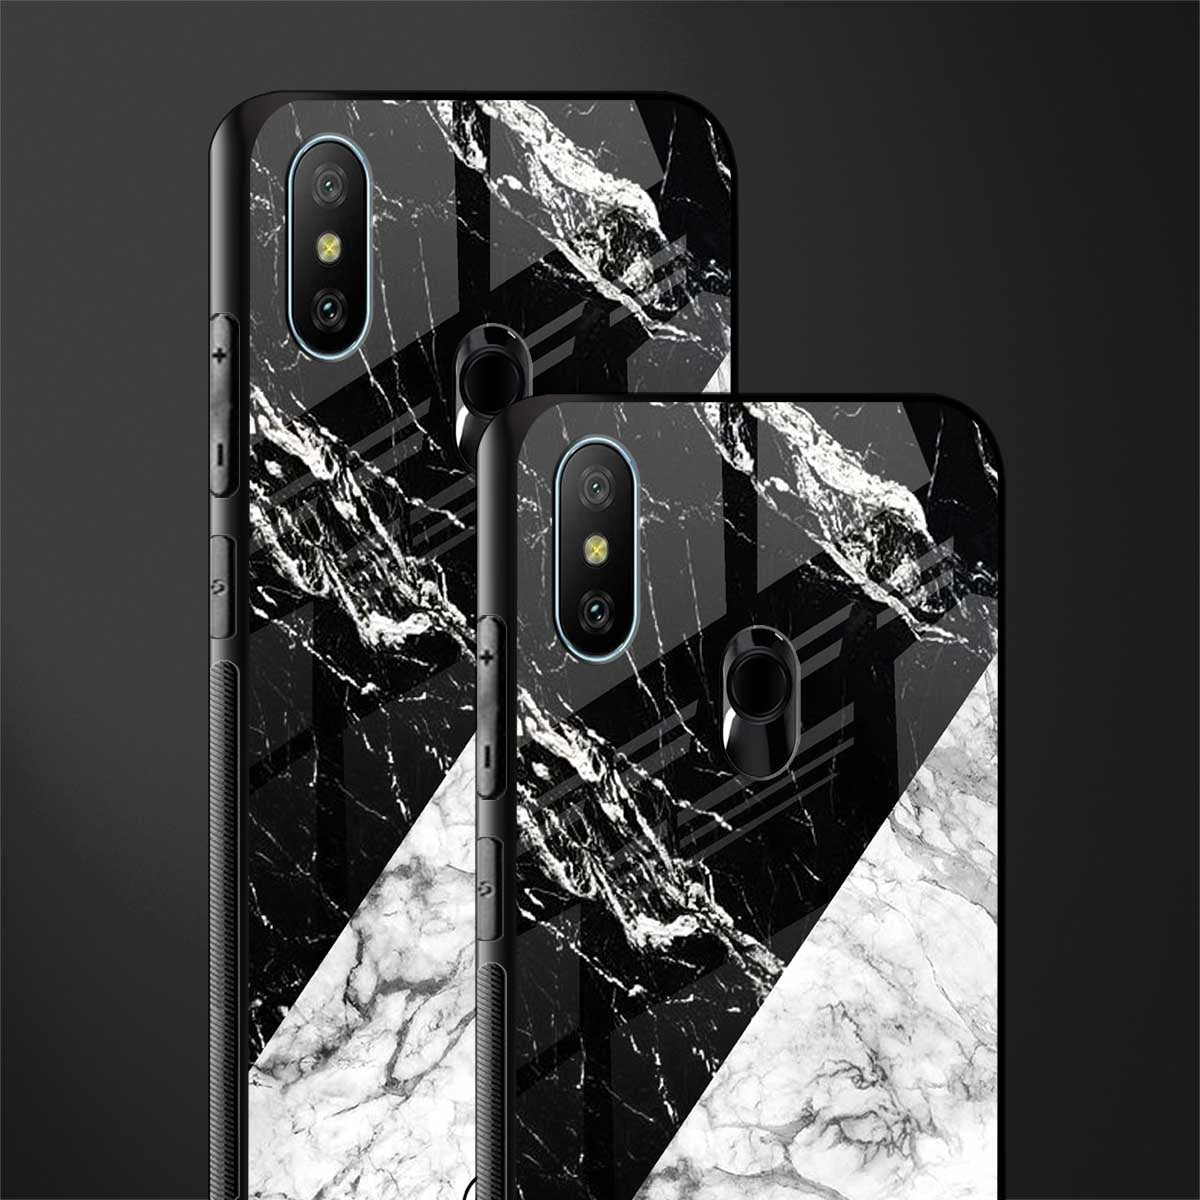 fatal contradiction phone cover for redmi 6 pro